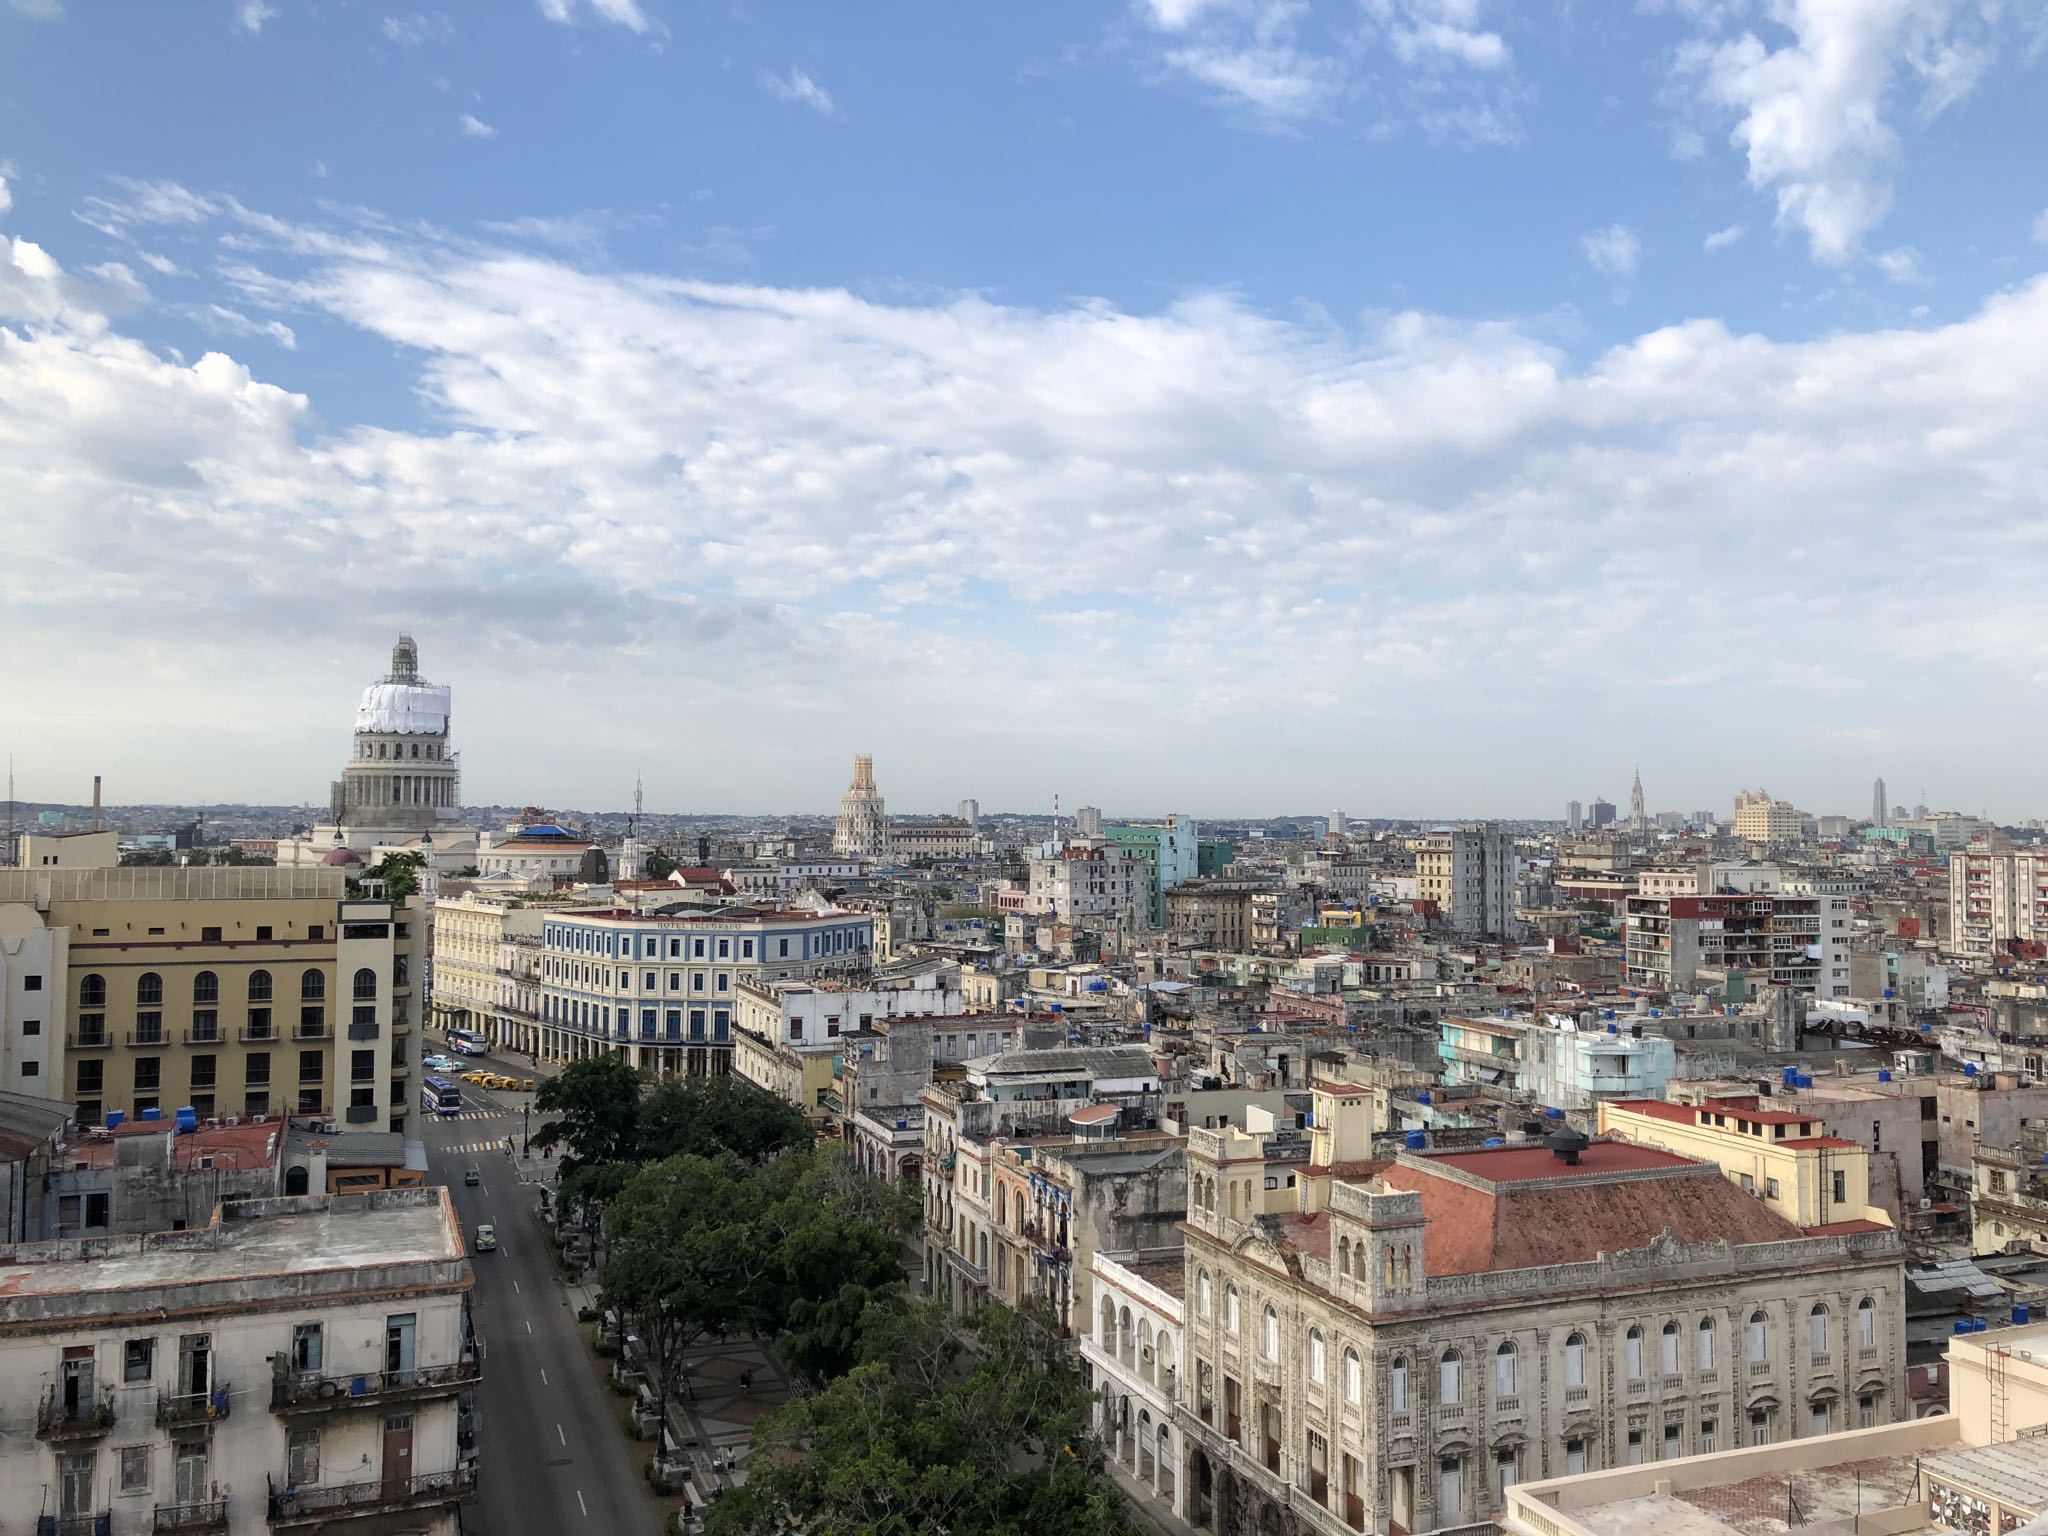 Photo 24 of 221 from the album Highlights Cuba 2019.